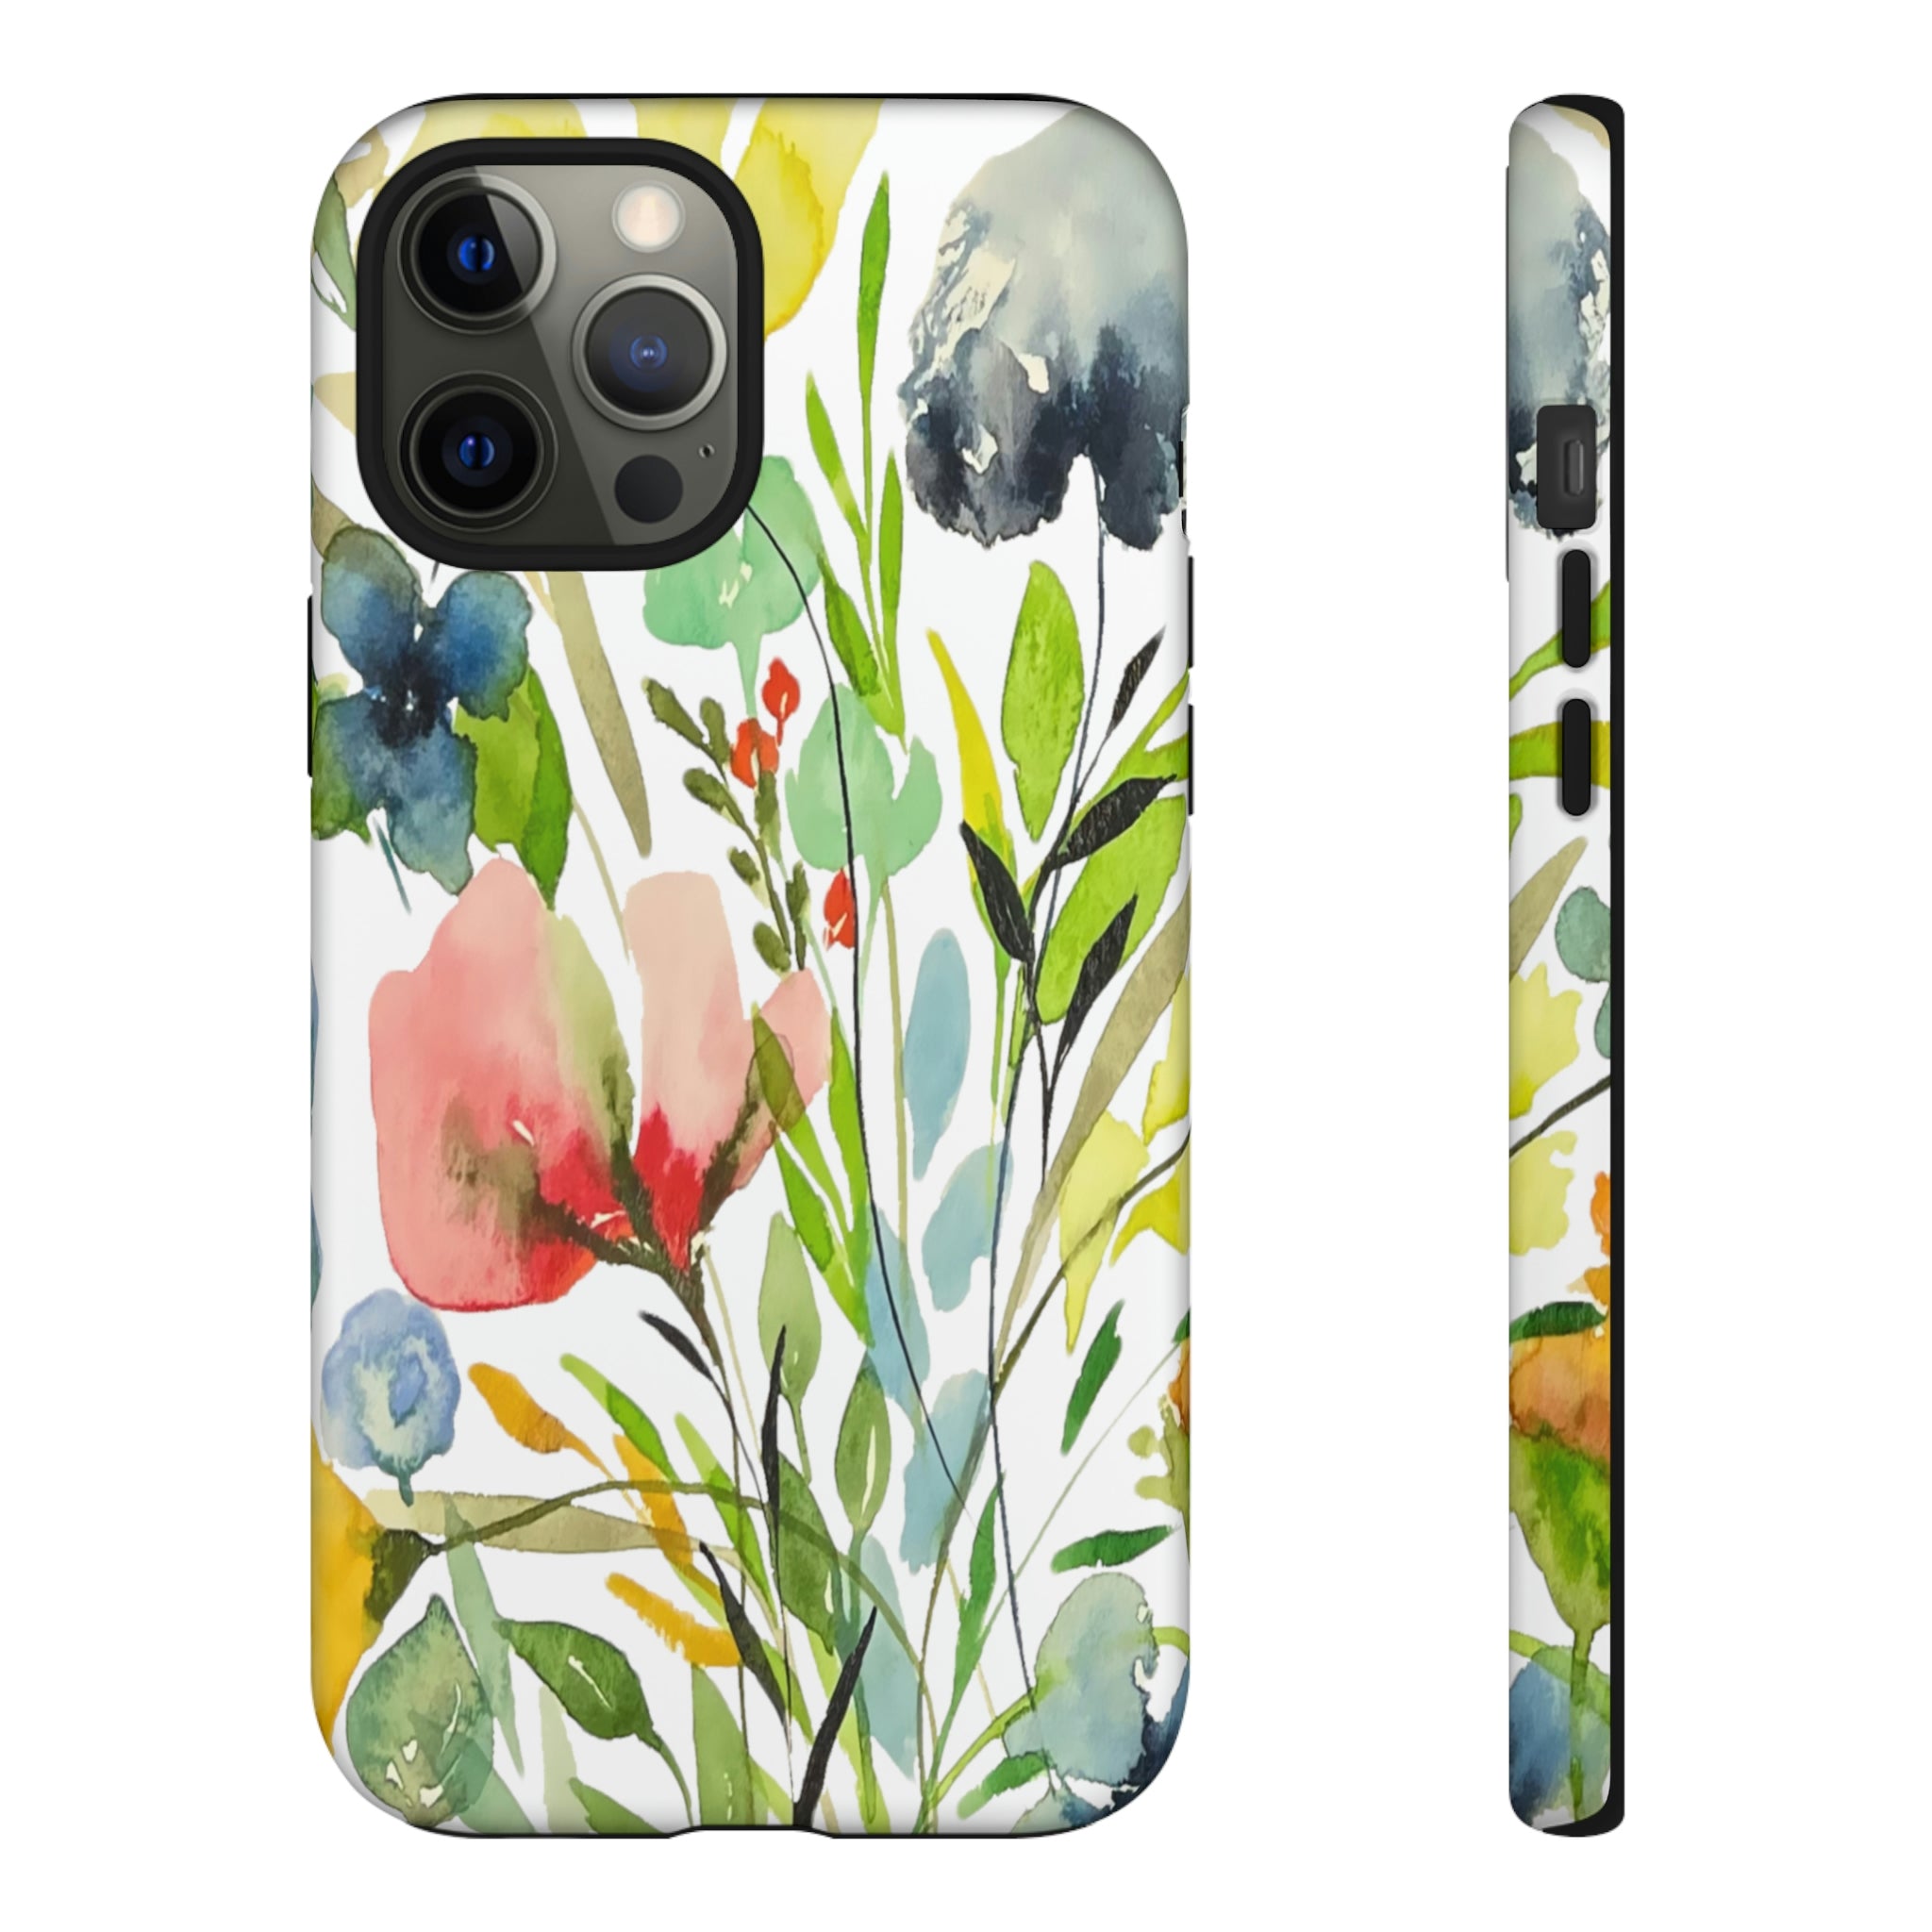 Flowers #3 Botanical Print on Cell Phone Cases | Apple iPhone, Samsung Galaxy, Google Pixel